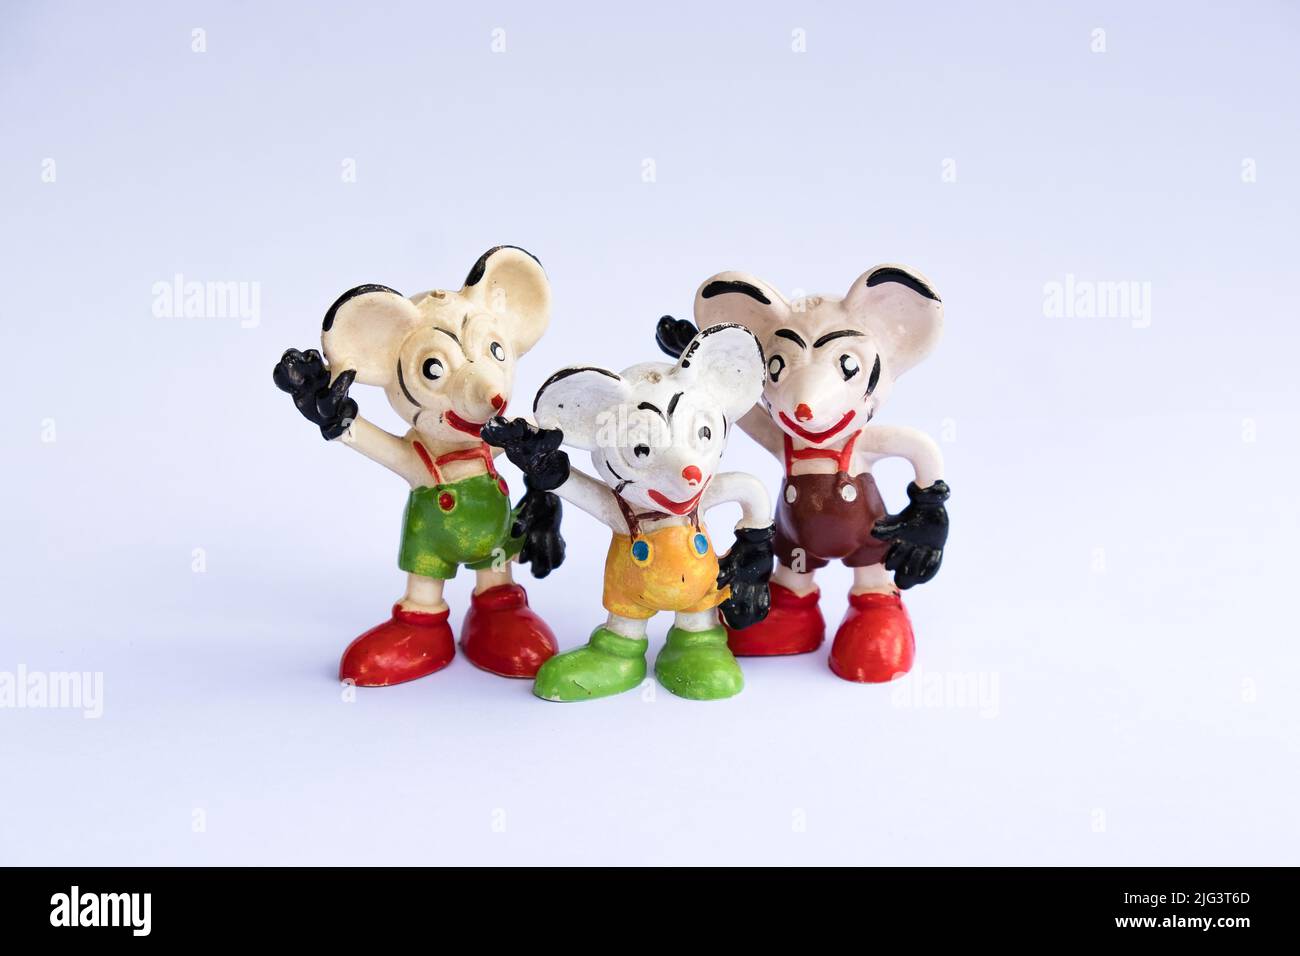 East German (GDR) version of Mickey Mouse. Unbranded old mouse rubber toy.  Colorful retro mice figures. Popular vintage Soviet toy from 70s & 80s  Stock Photo - Alamy